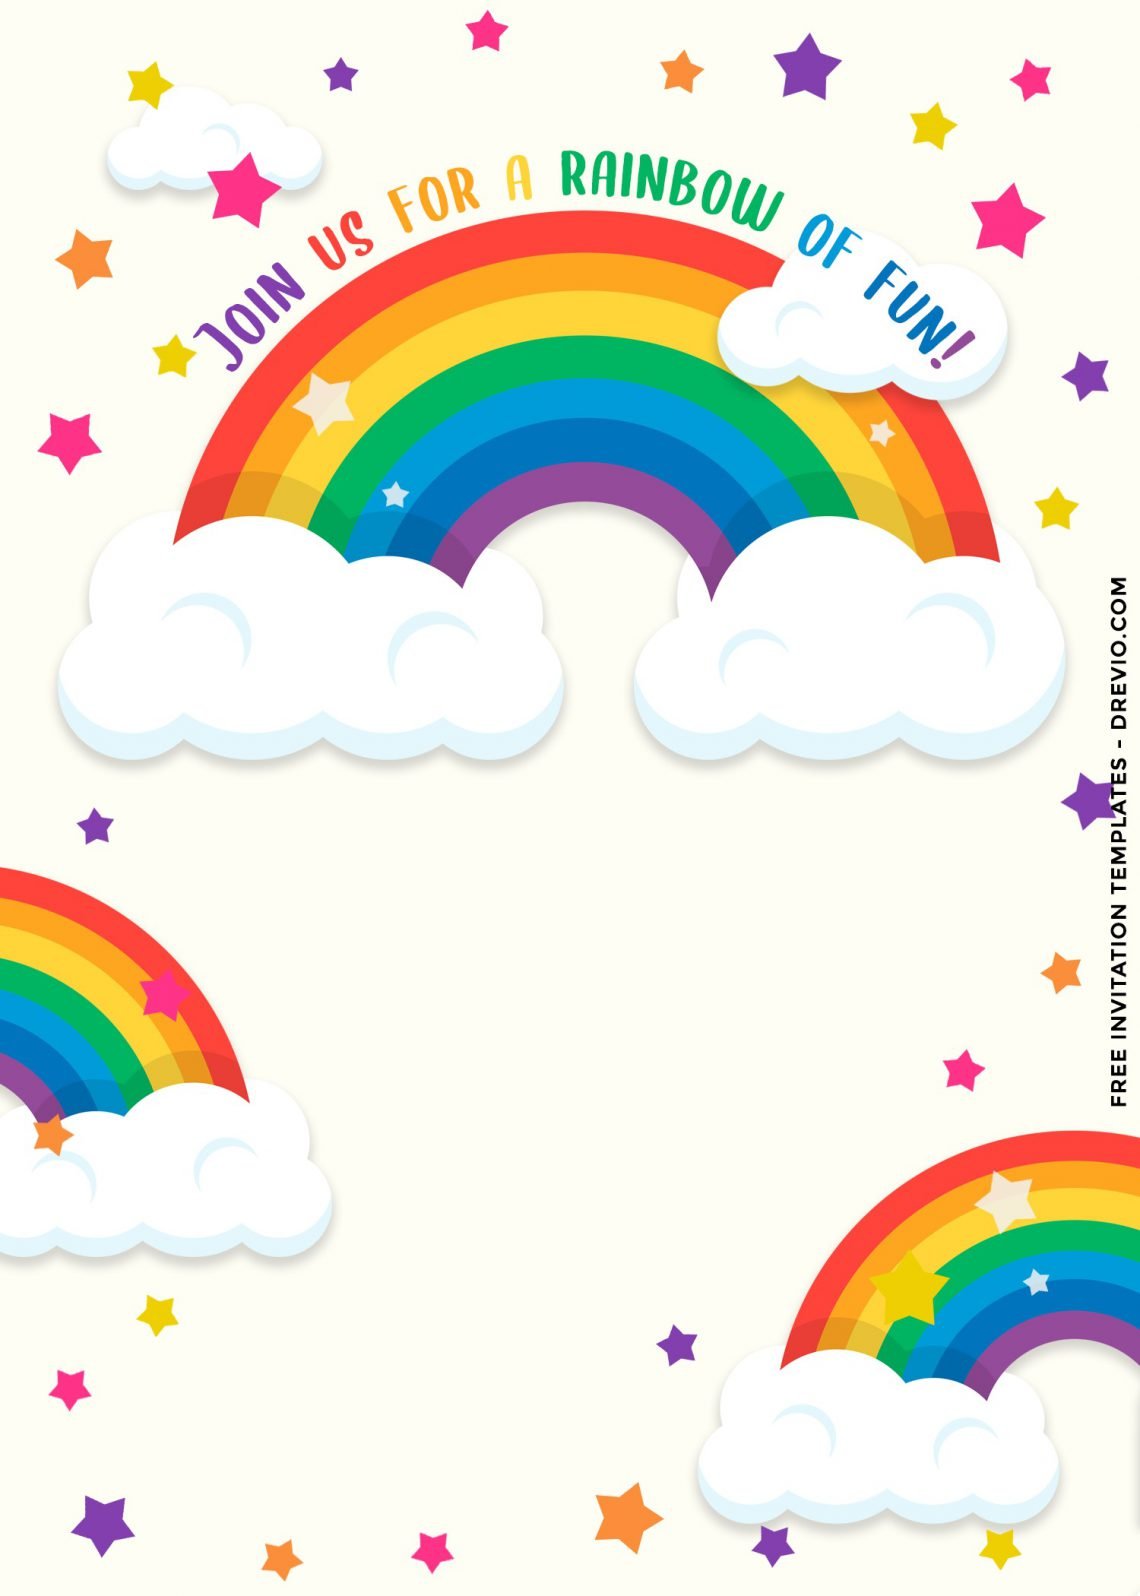 9+ Colorful Rainbow Invitation Card For Your Delightful Birthday Party and it has sparkling stars and rainbow